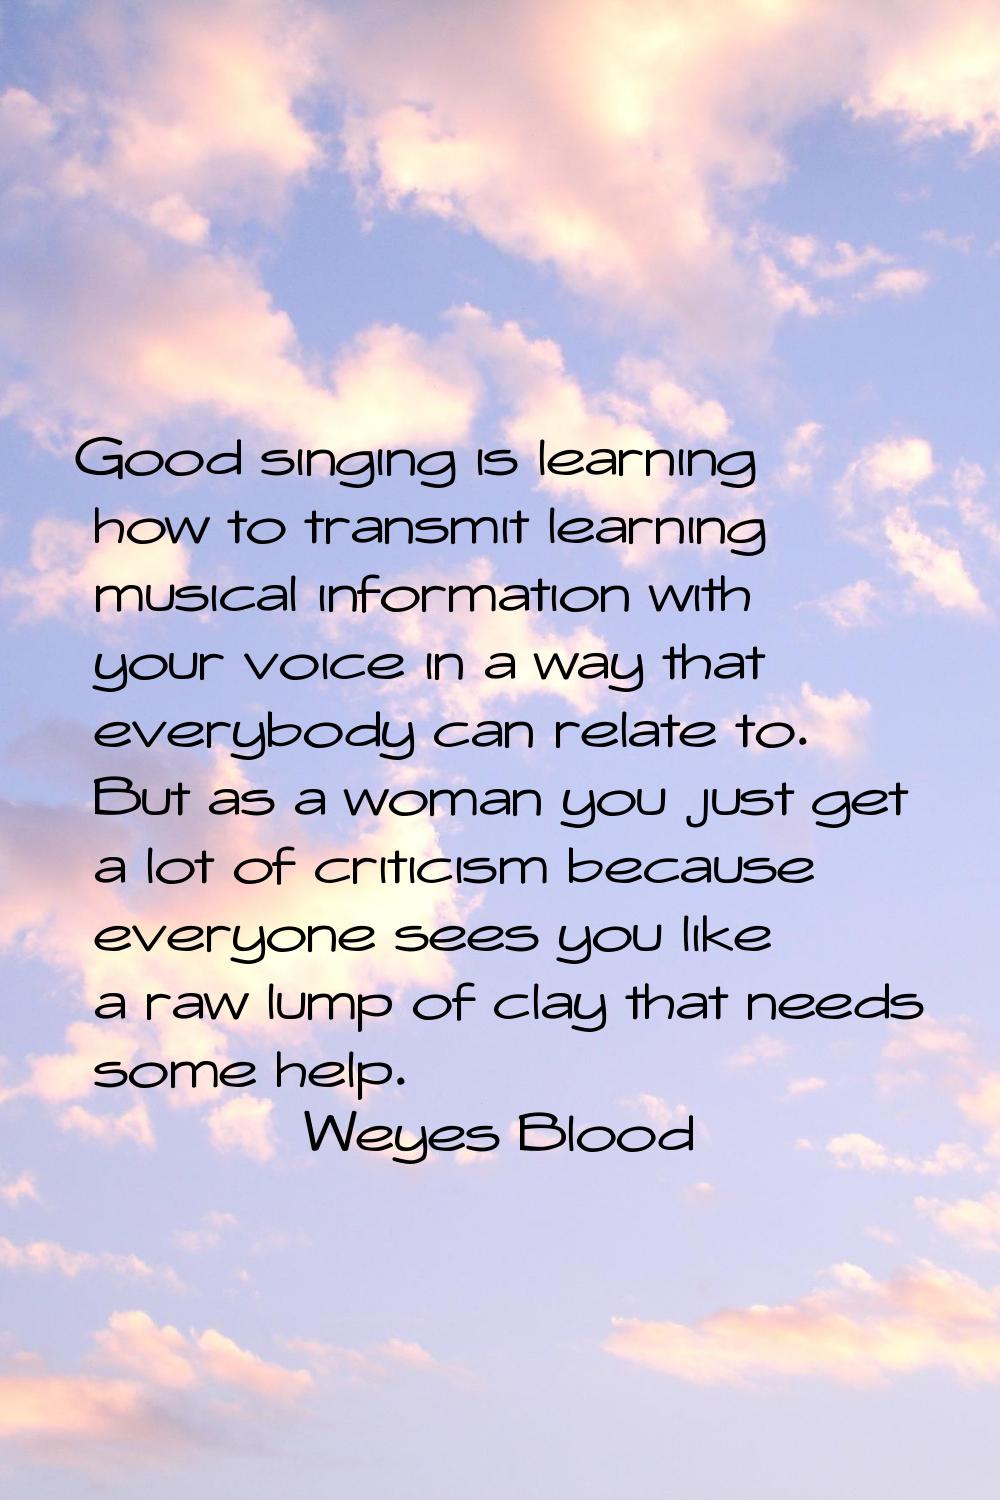 Good singing is learning how to transmit learning musical information with your voice in a way that